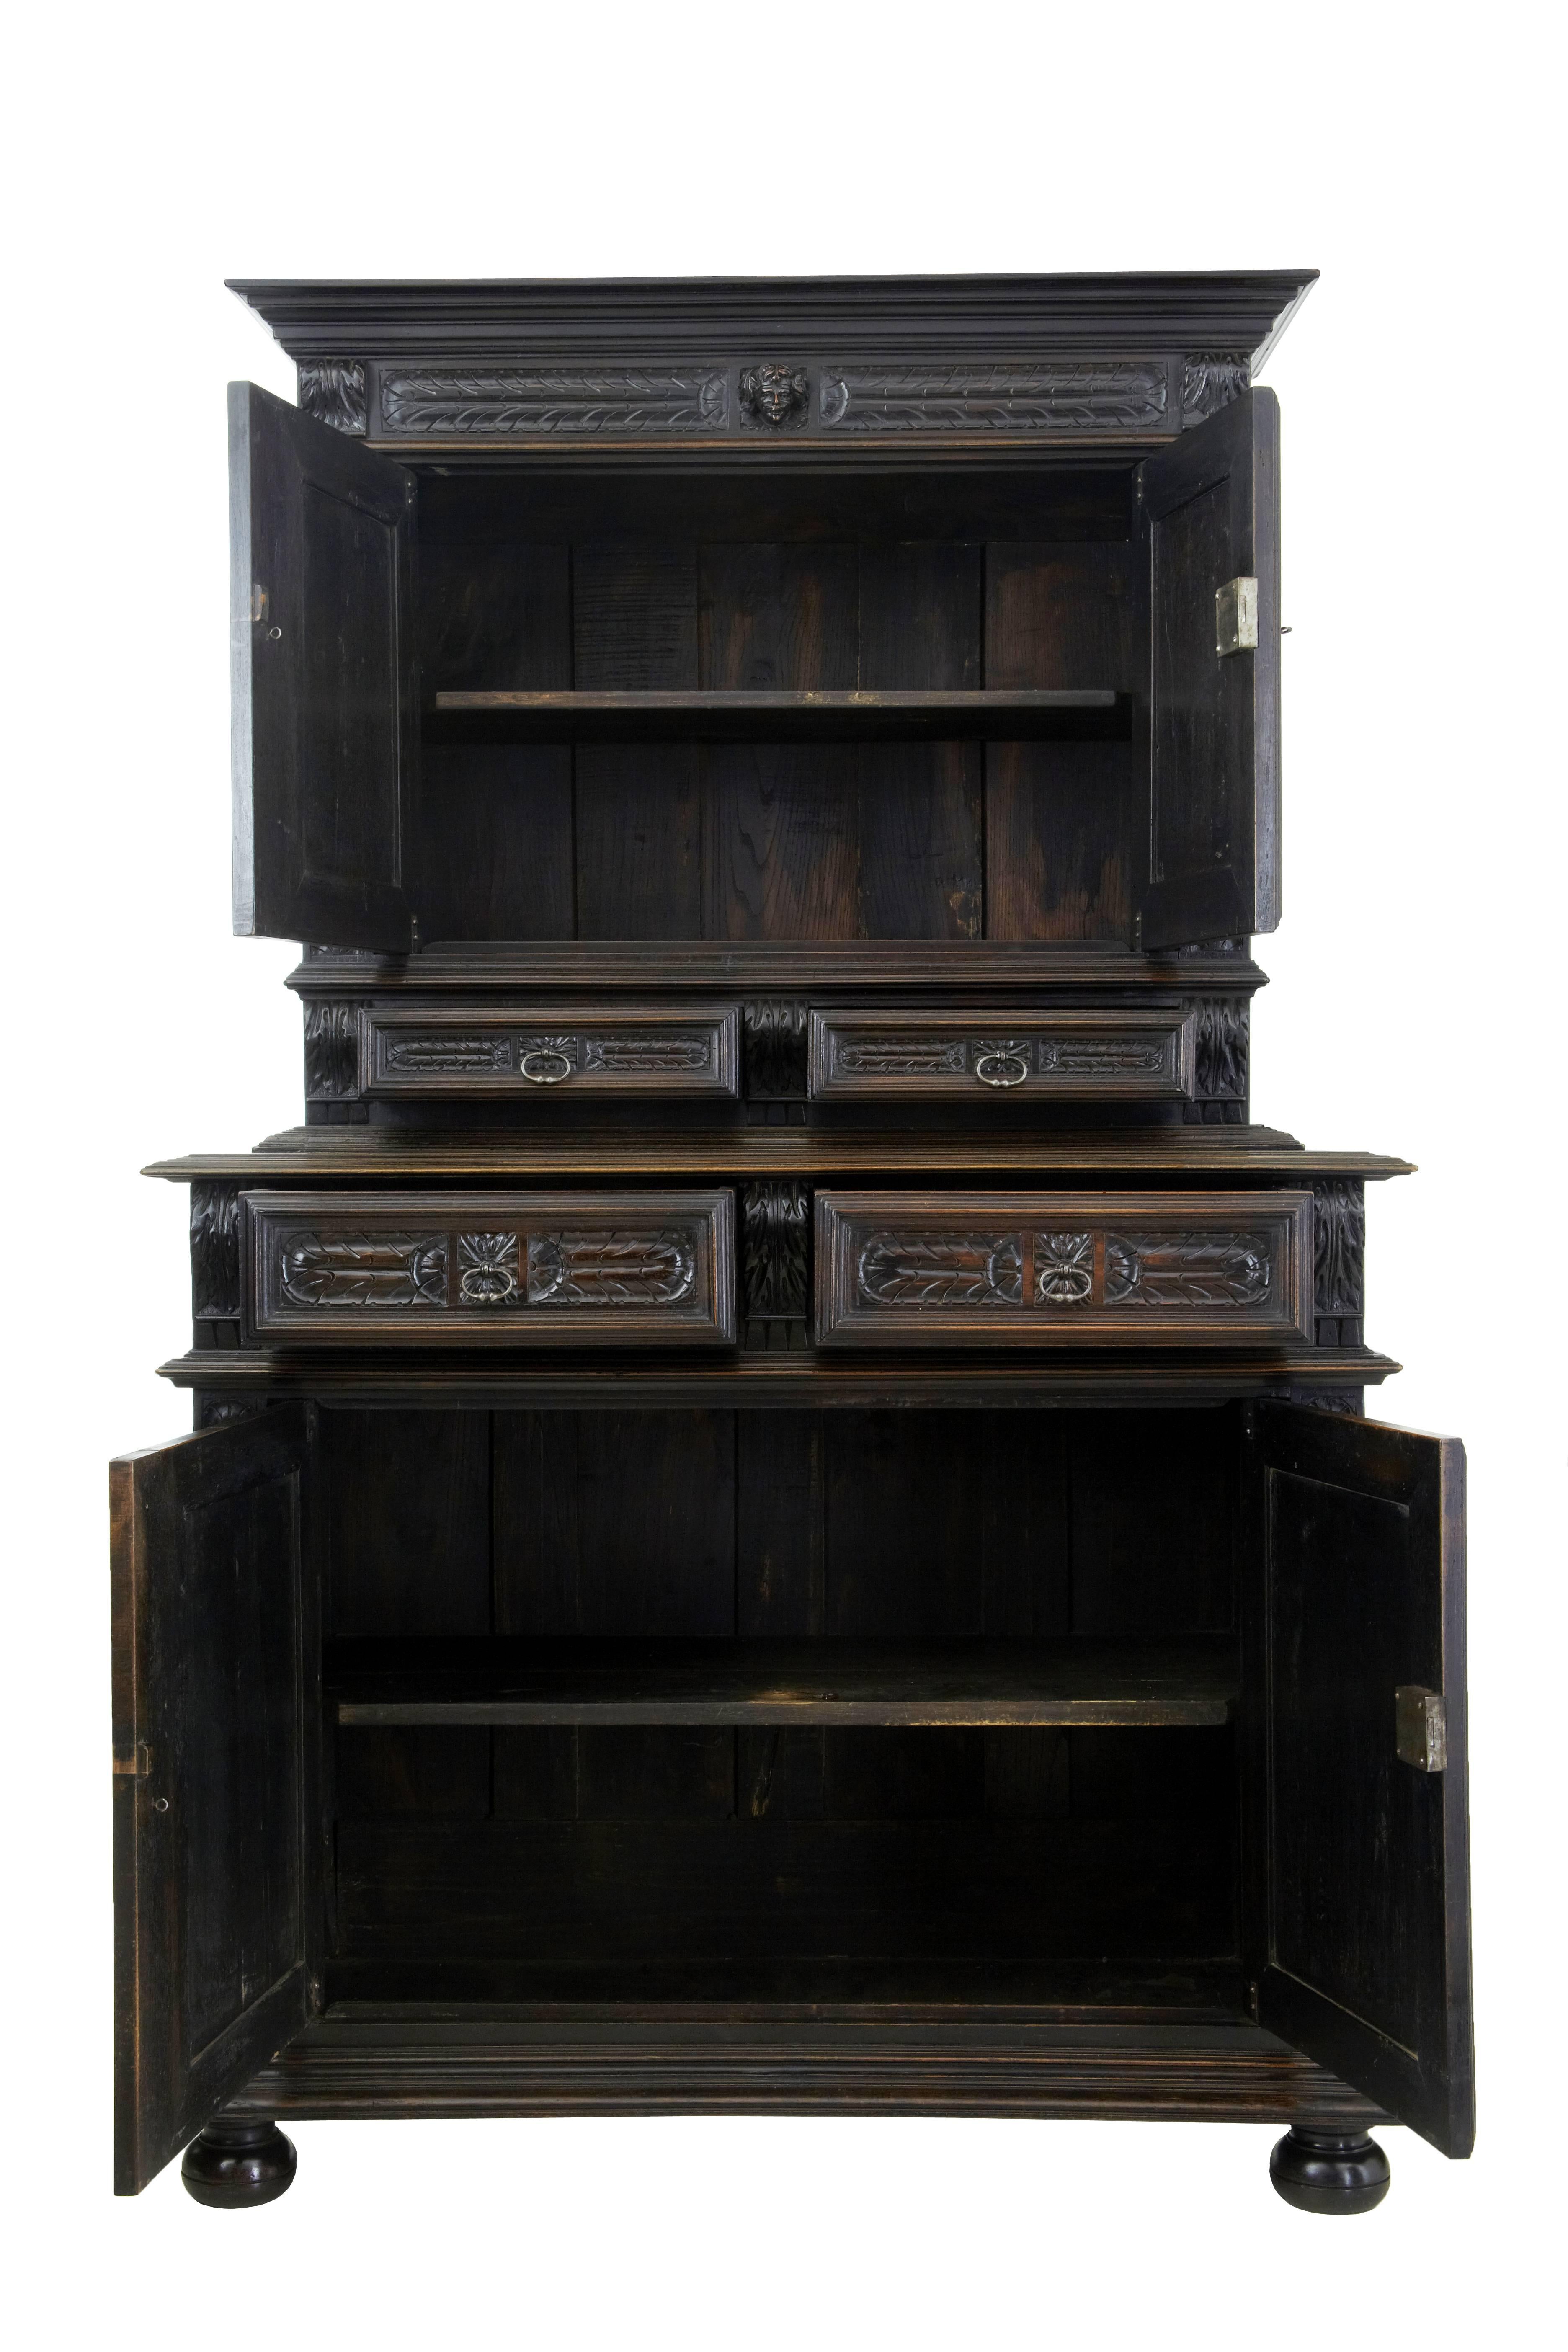 Good quality carved Italian two part cabinet cupboard, circa 1880.
Beautifully carved in a dark walnut.
Features four carved panels on the doors of Spanish gentlemen in 16th century dress.
Comprising of two parts, the top section with a double